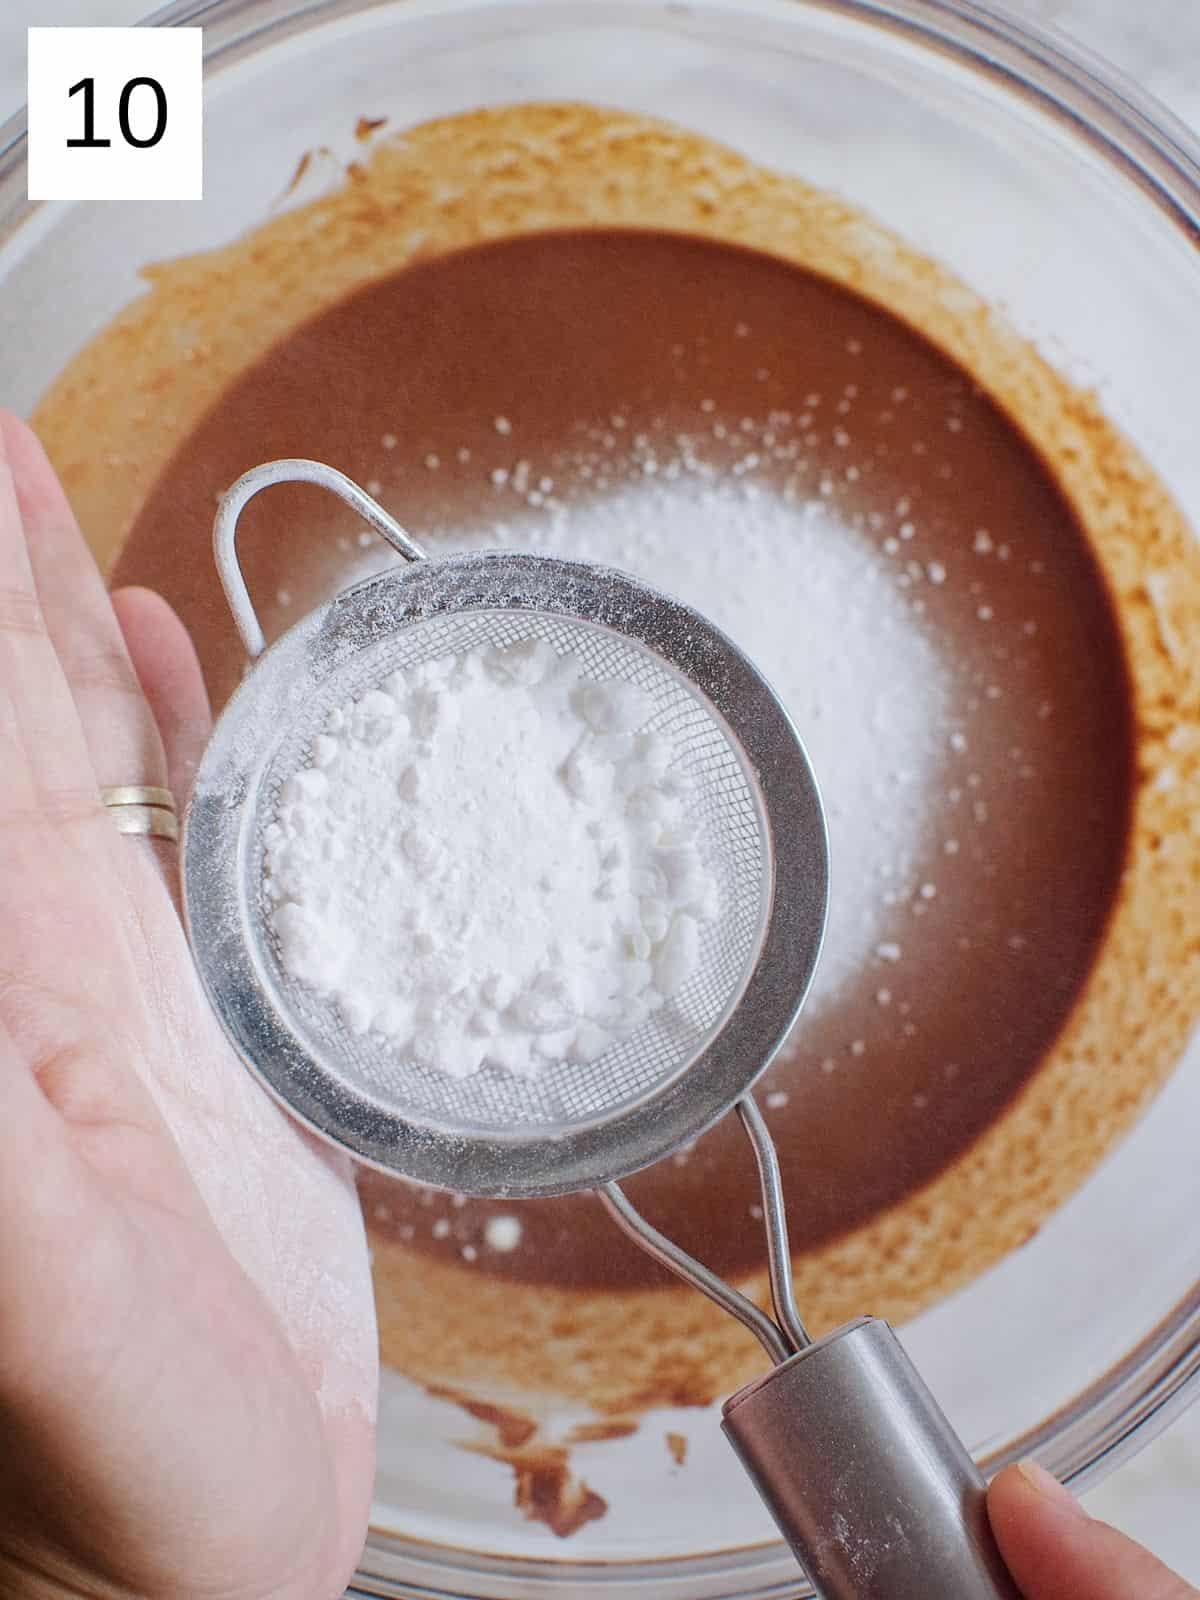 Icing sugar on a sift being poured in the cocoa butter.